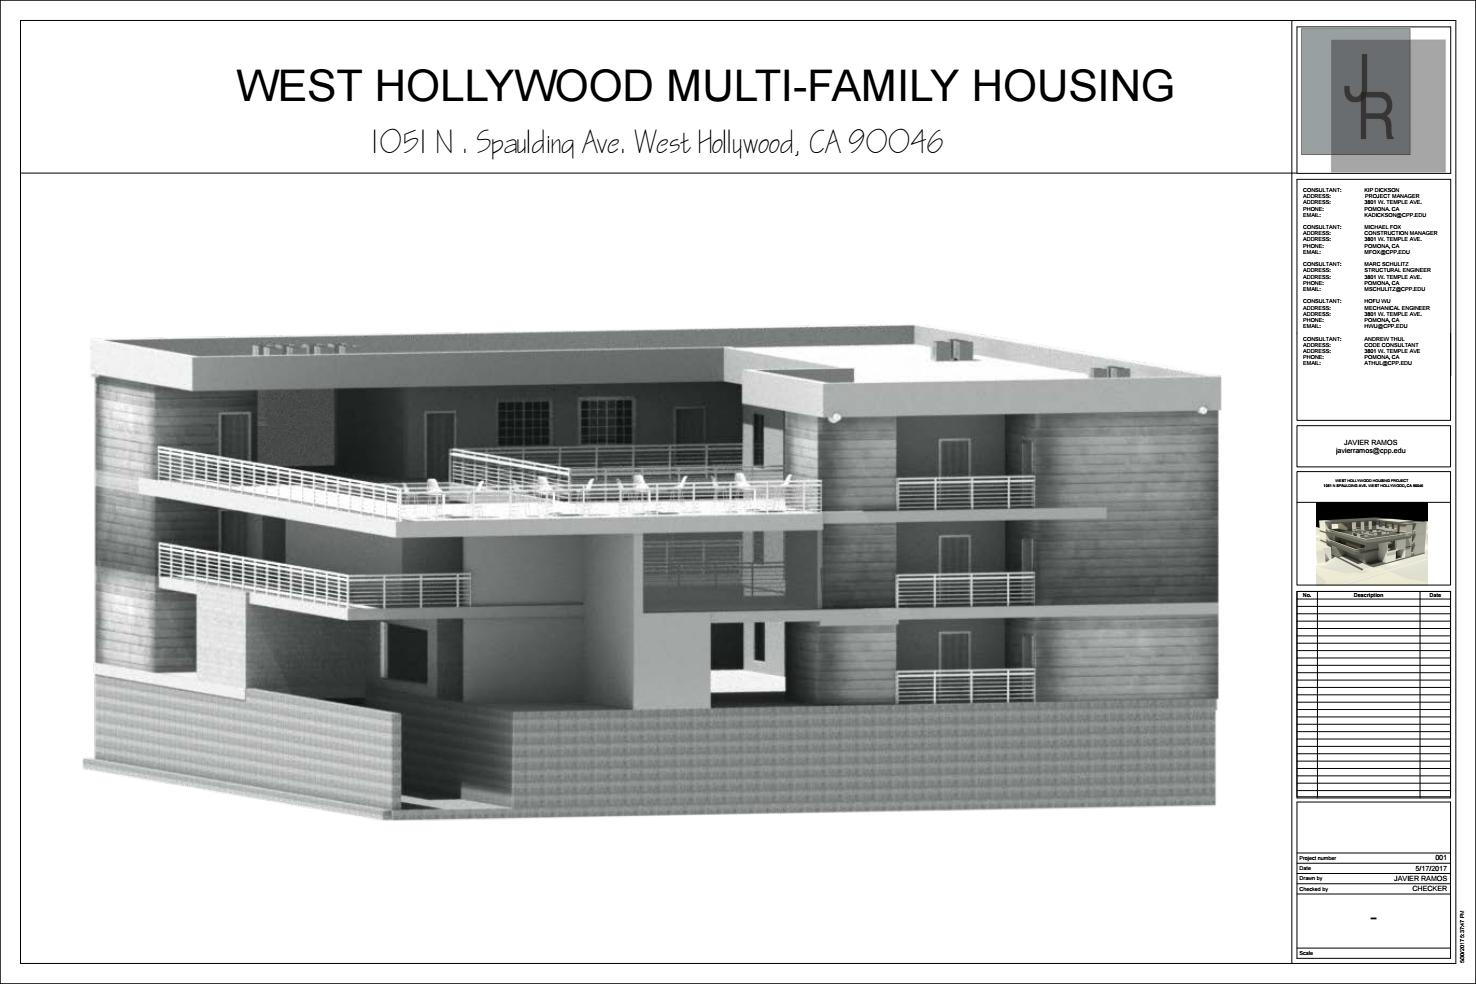 Majestic Fireplace Manual Fresh West Hollywood Housing Project by Javier Ramos issuu